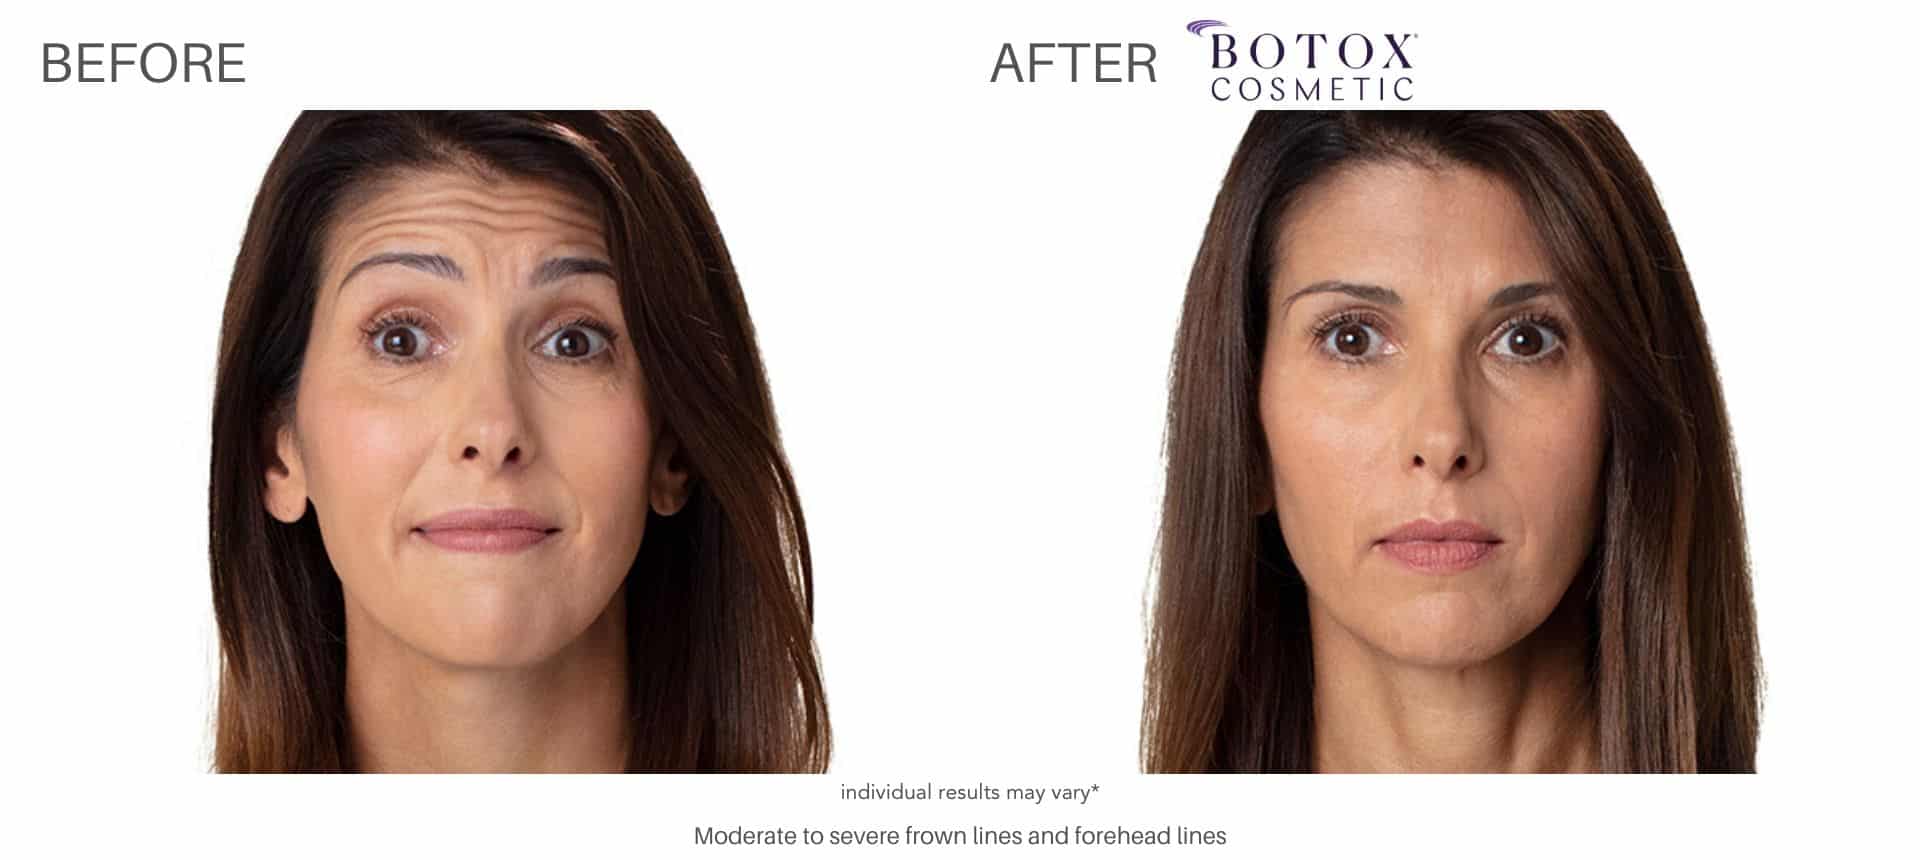 Botox before and after pictures